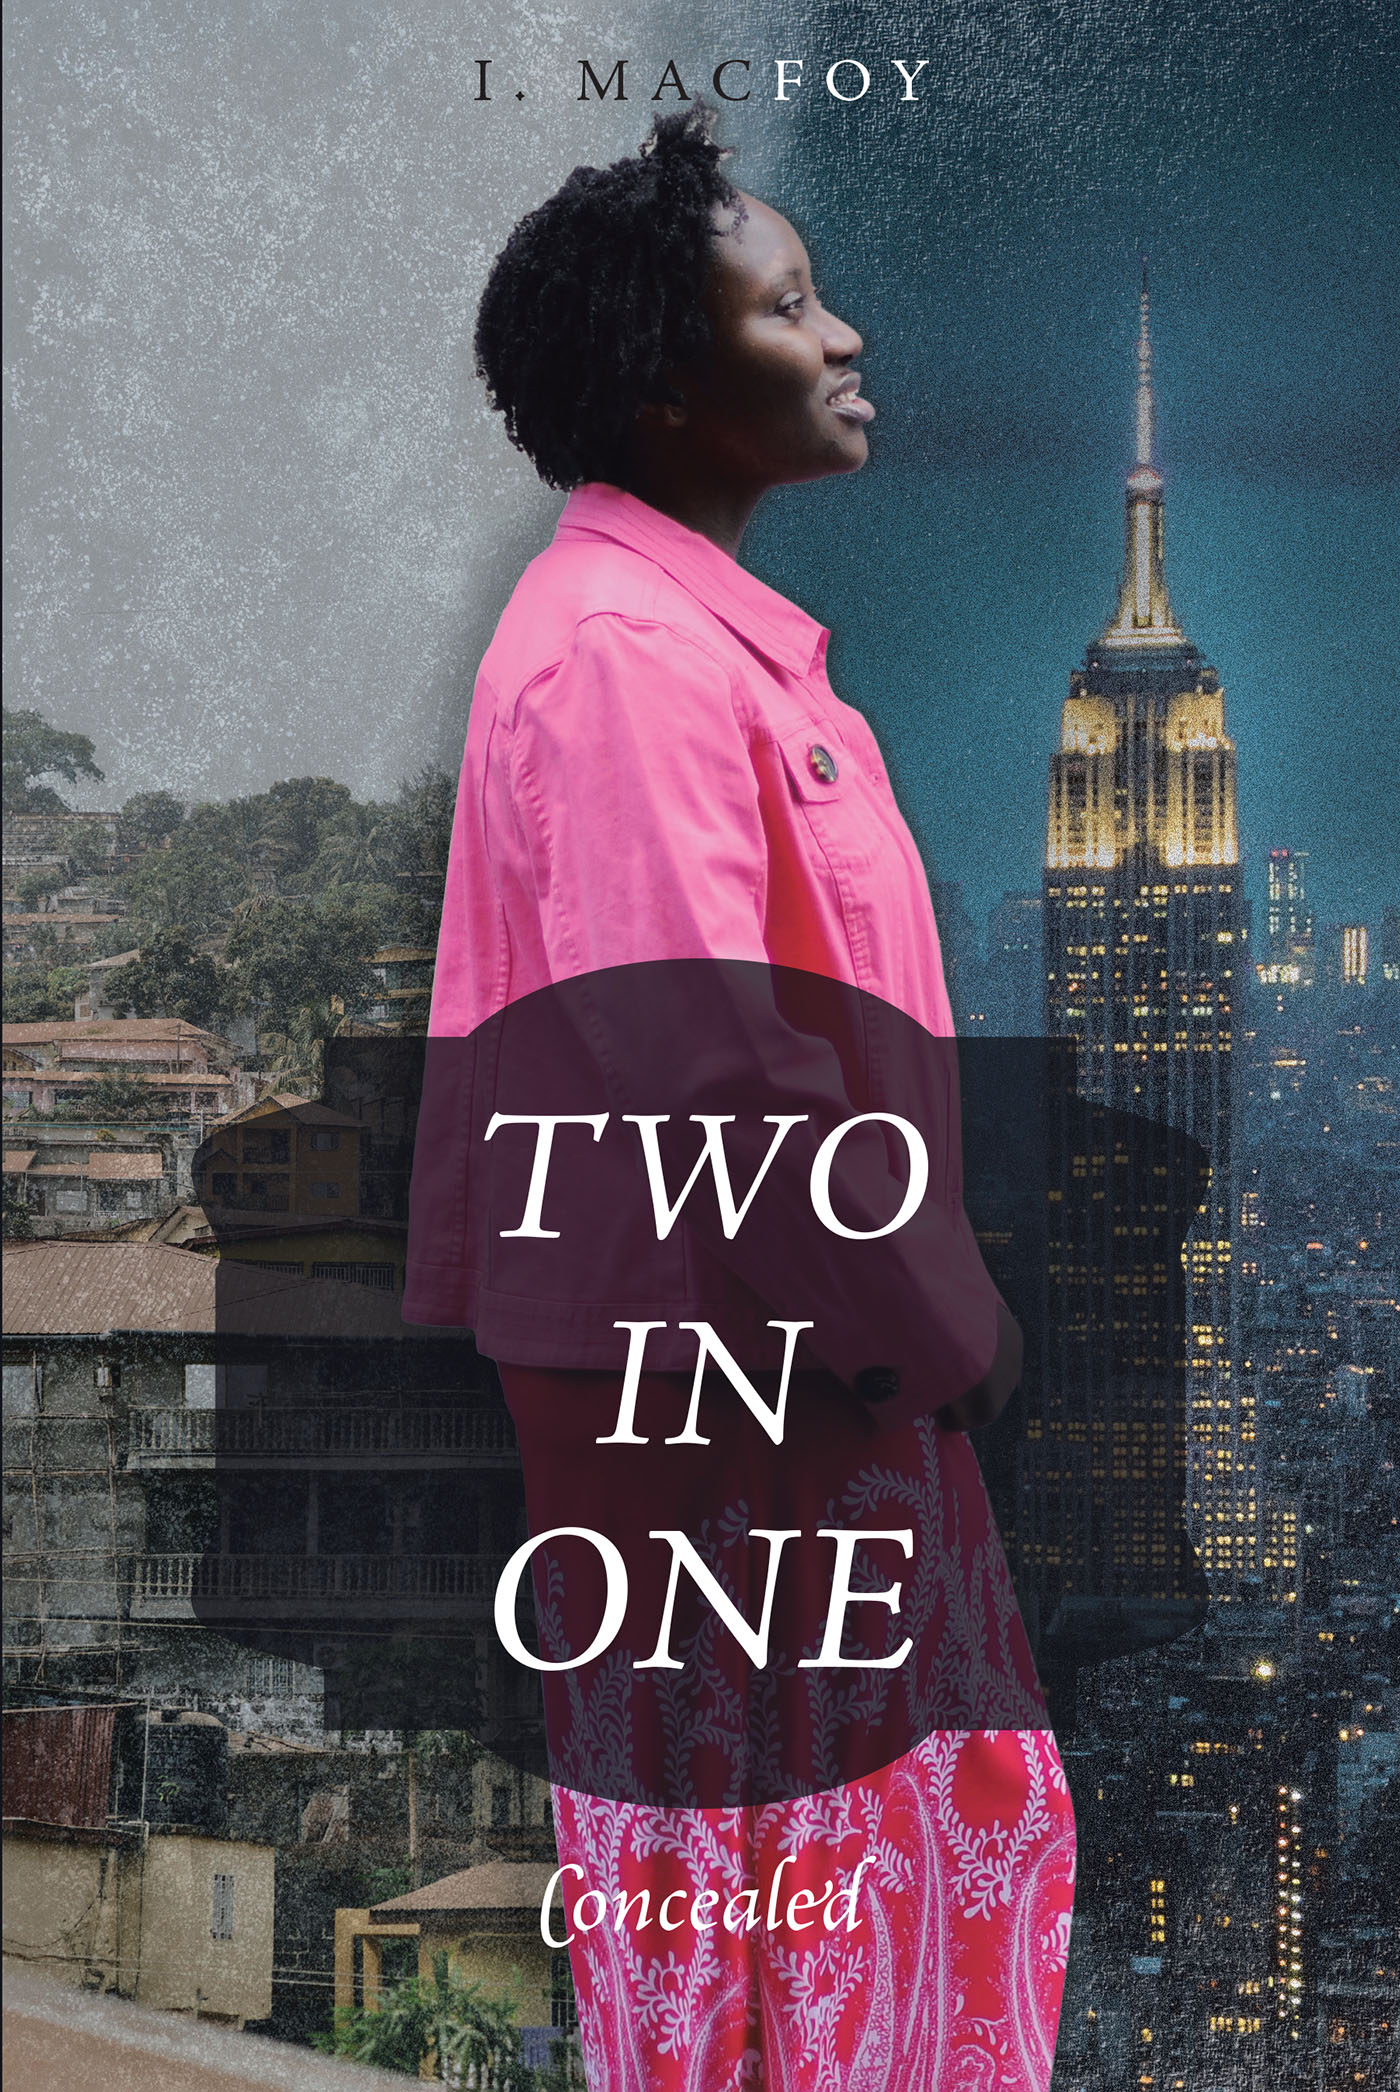 I. Macfoy’s Newly Released “TWO IN ONE: Concealed” is a Powerful Memoir That Takes Readers Into a Woman’s Journey to a New Country and Renewed Faith